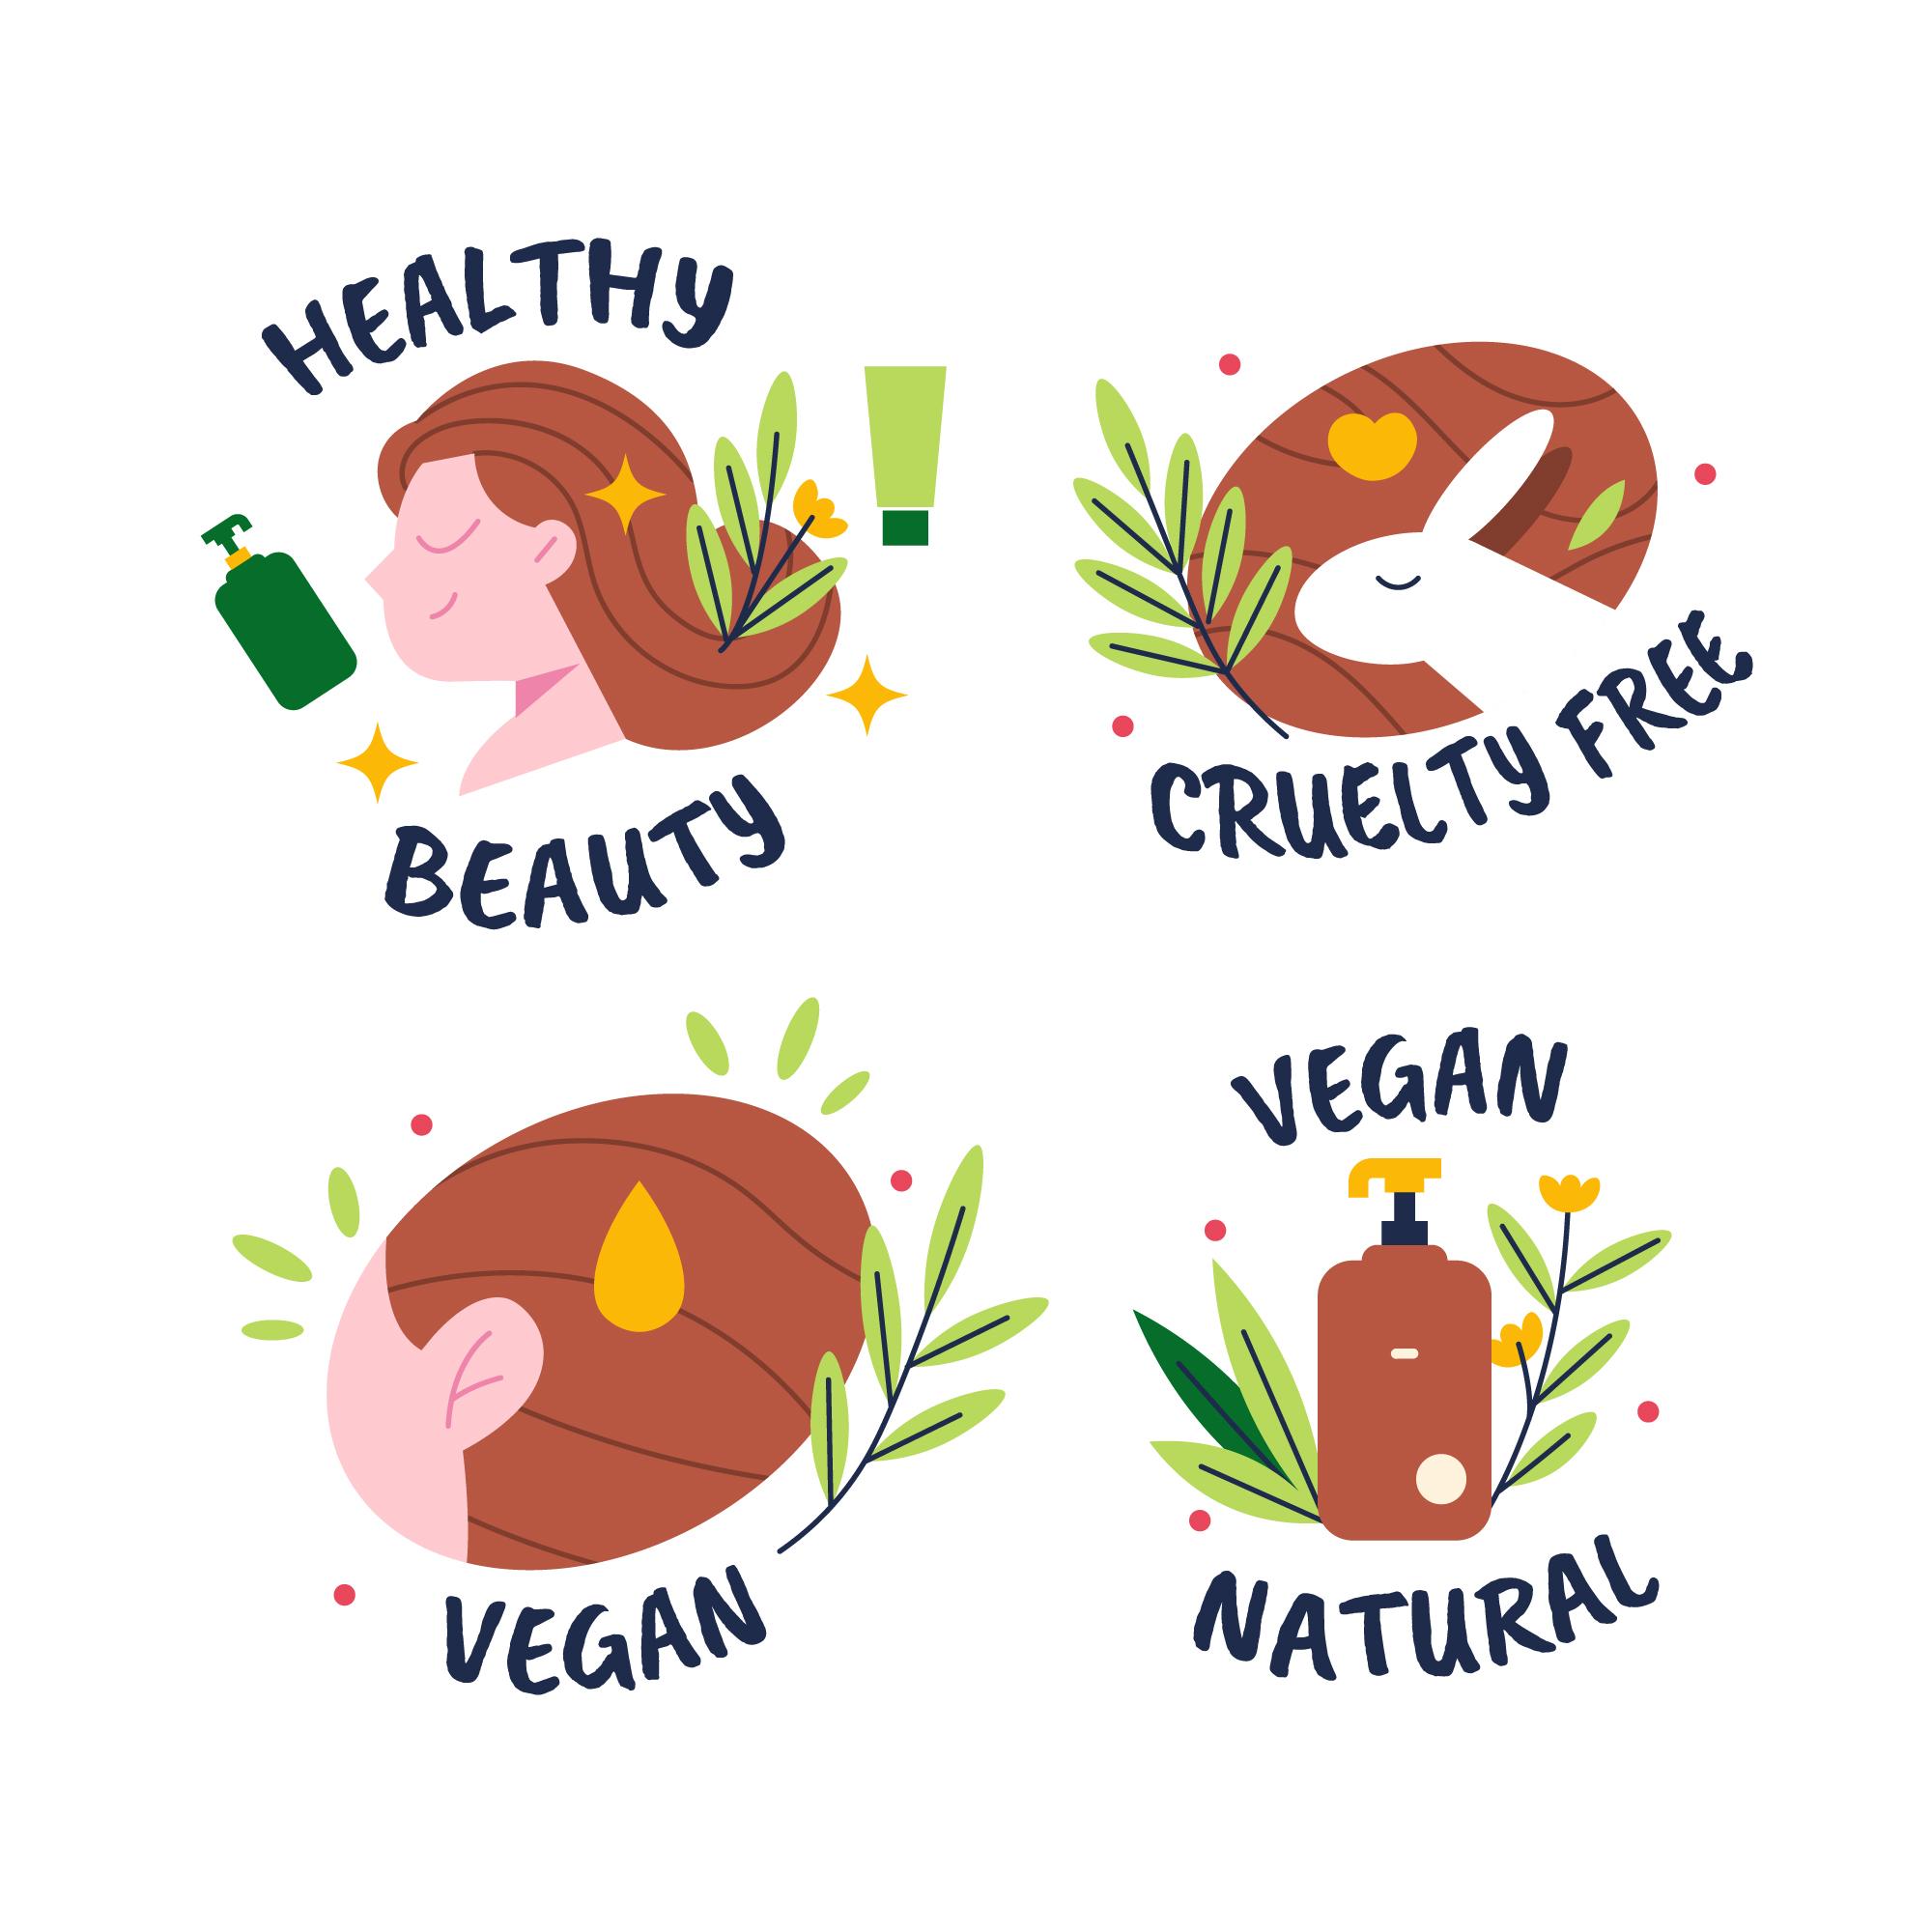 Cruelty free, vegan and Natural product logos